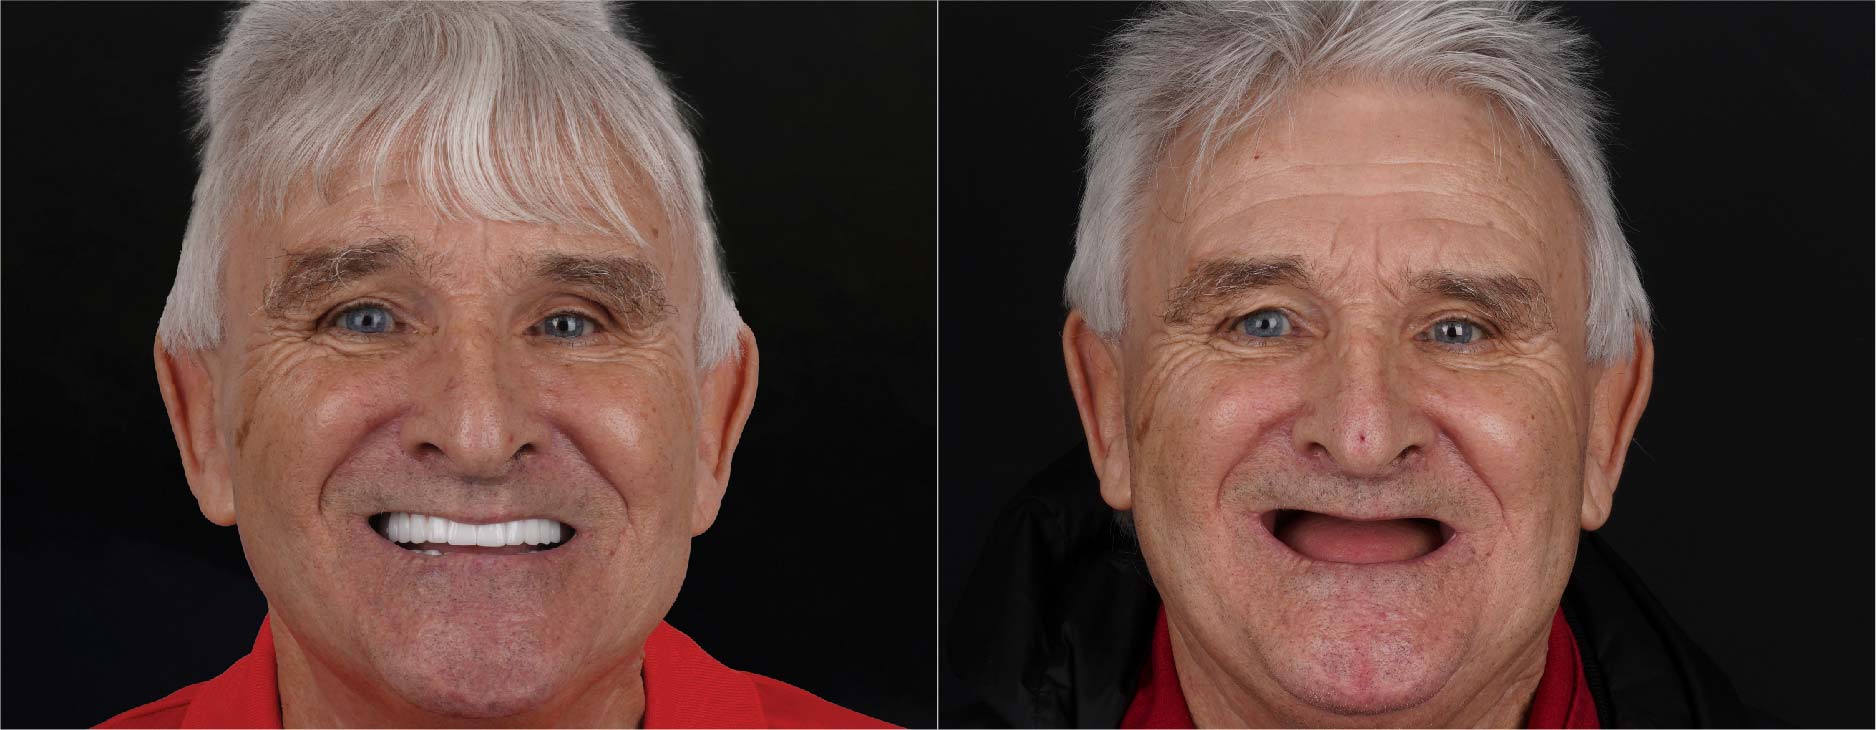 All-on-4 Dental Implants Before and After